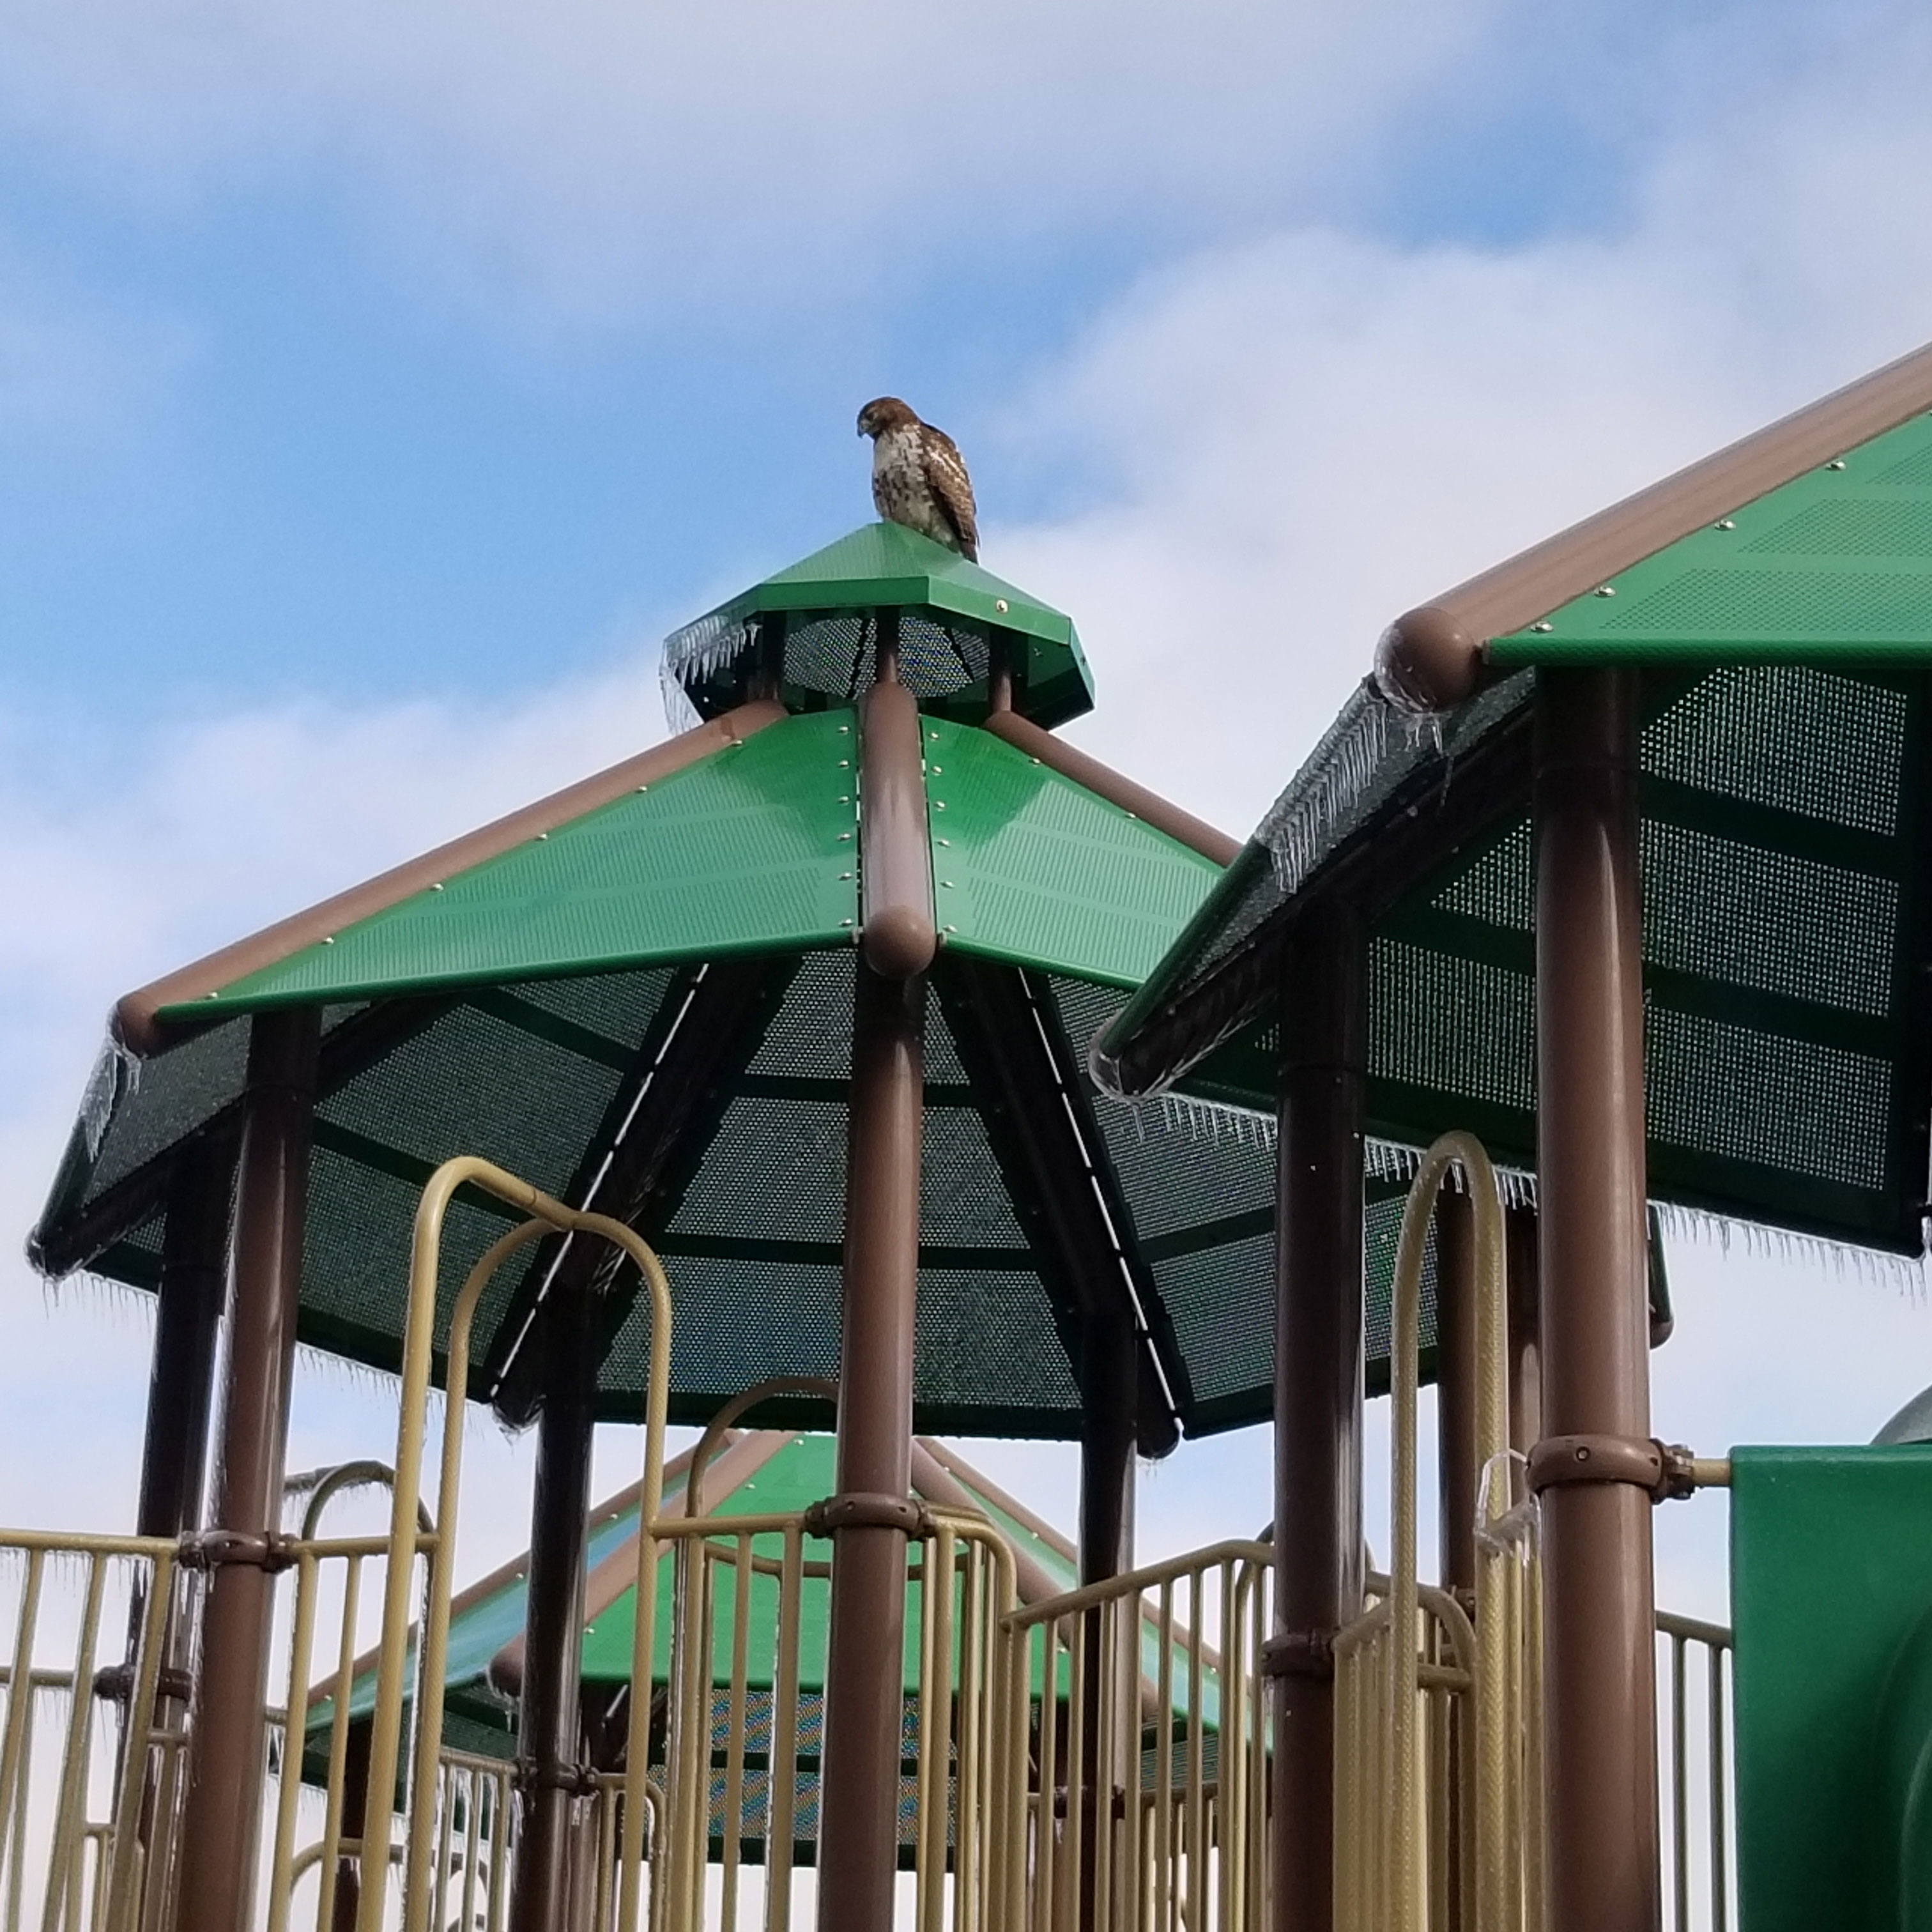 Red-tailed hawk perched at the playground at Ross Dock